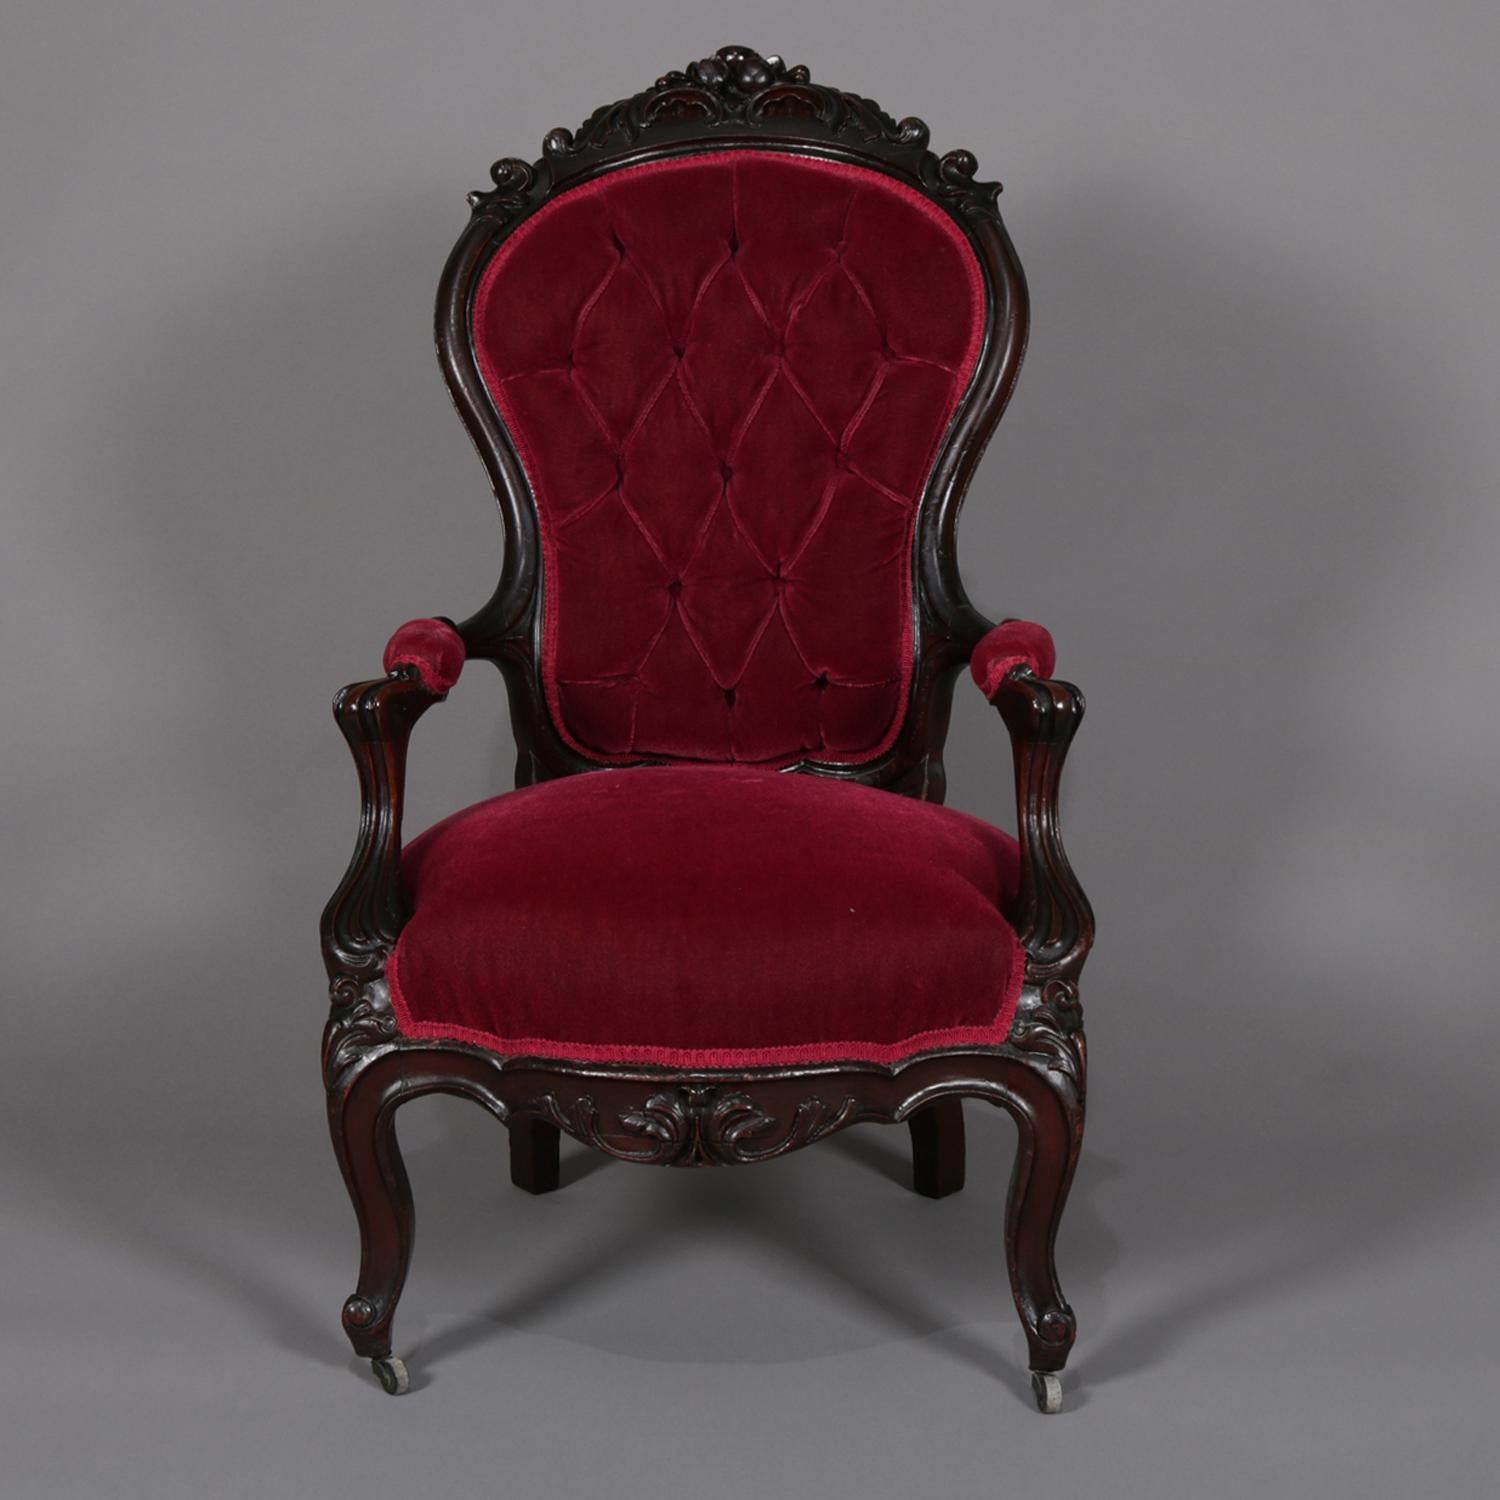 American Antique Rococo Revival Carved Walnut and Velvet Button Back Parlor Armchair